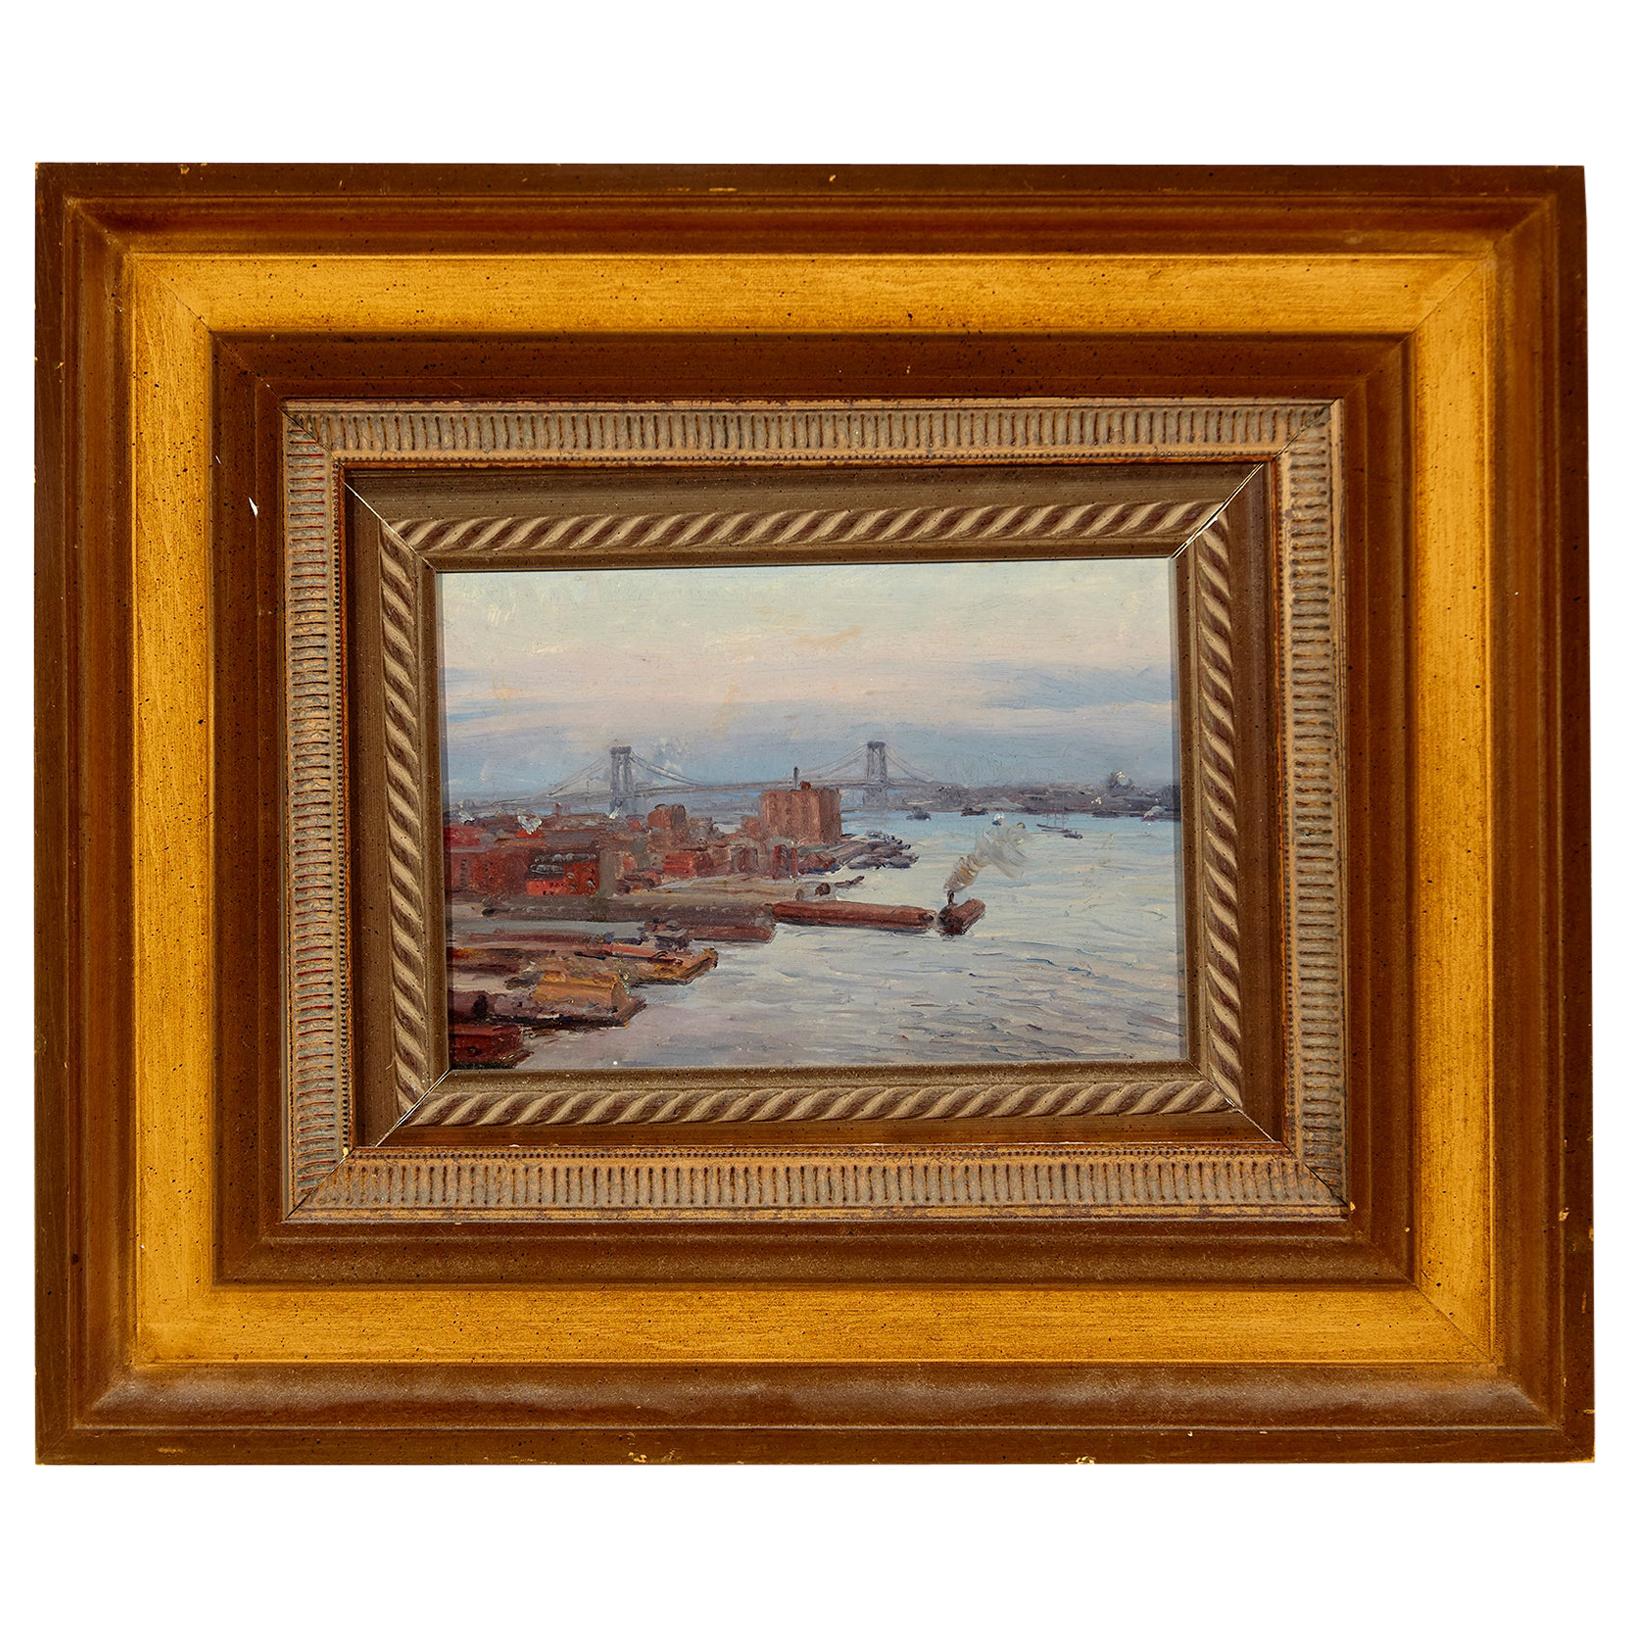 'East River, NYC Harbor' Unsigned Painting Oil on Board, Early 20th Century